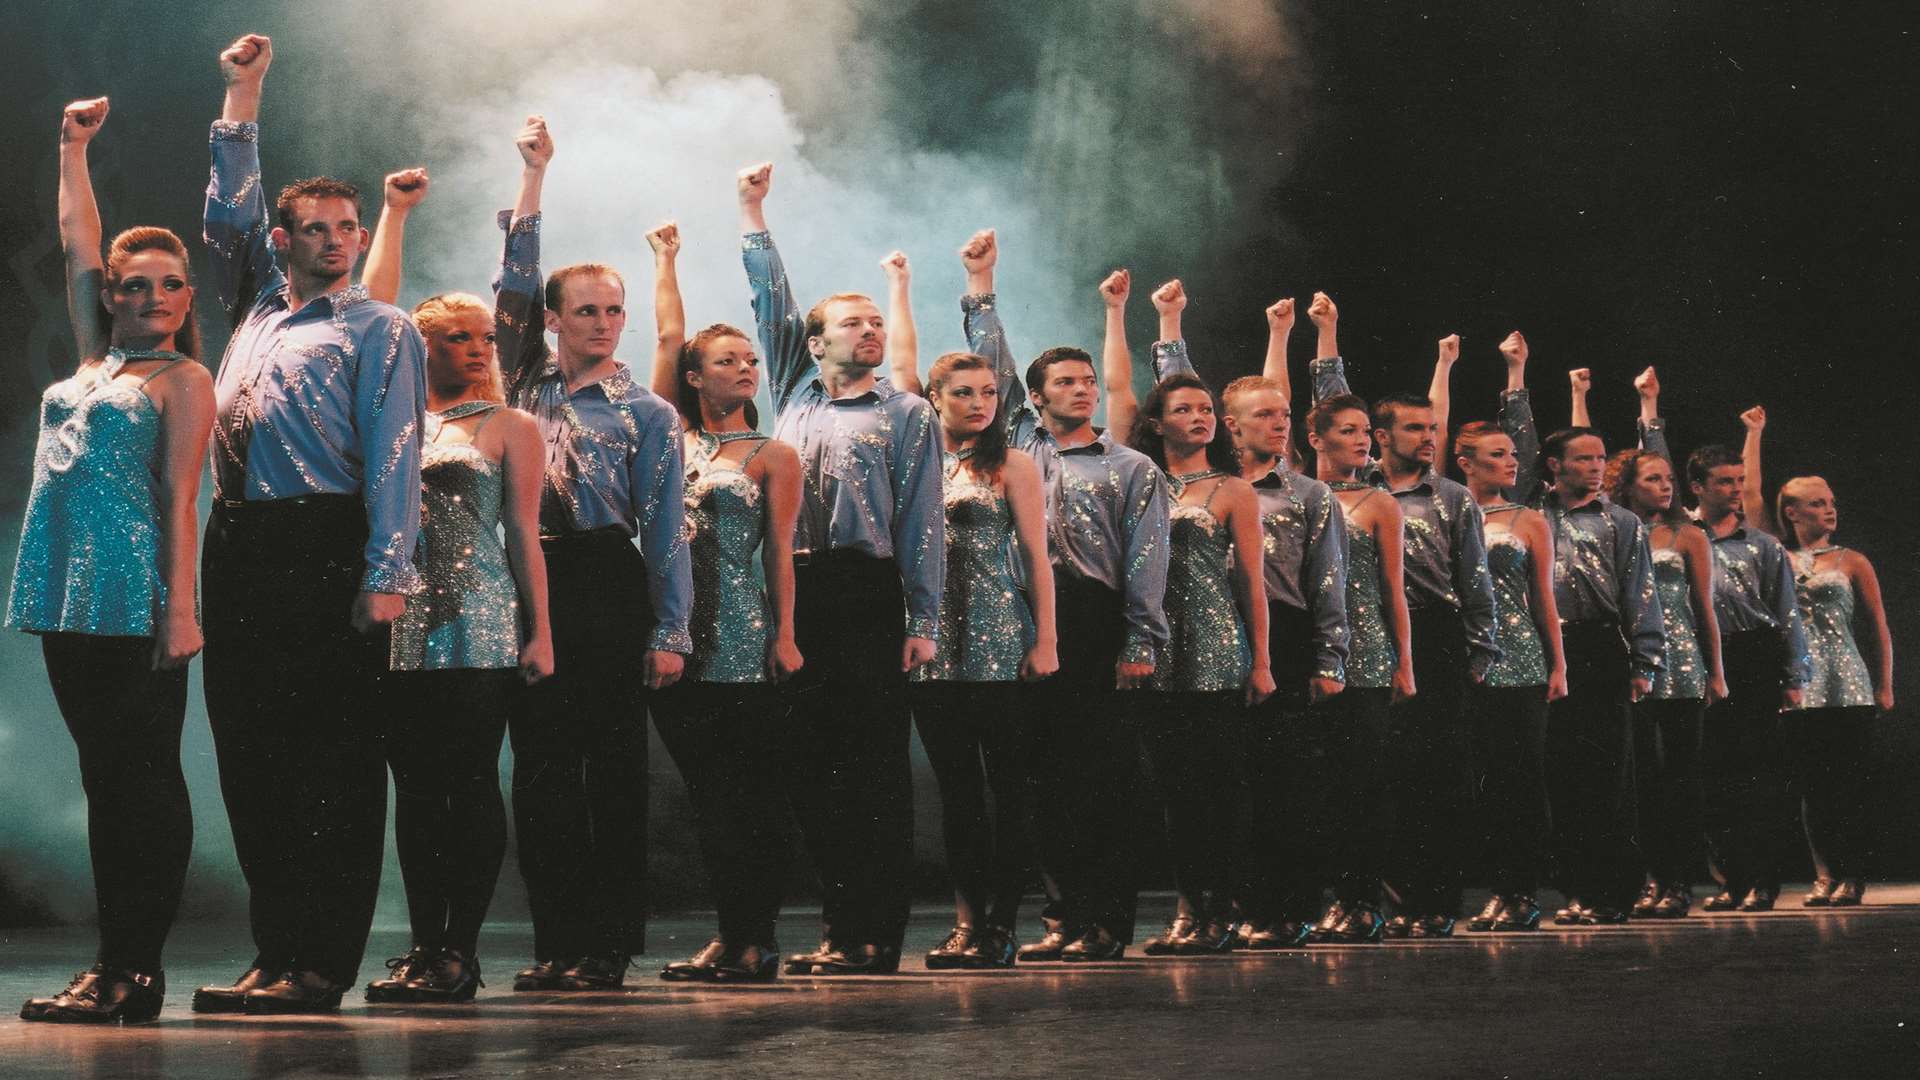 Spirit of the Dance is at the Orchard Theatre until Saturday, August 22